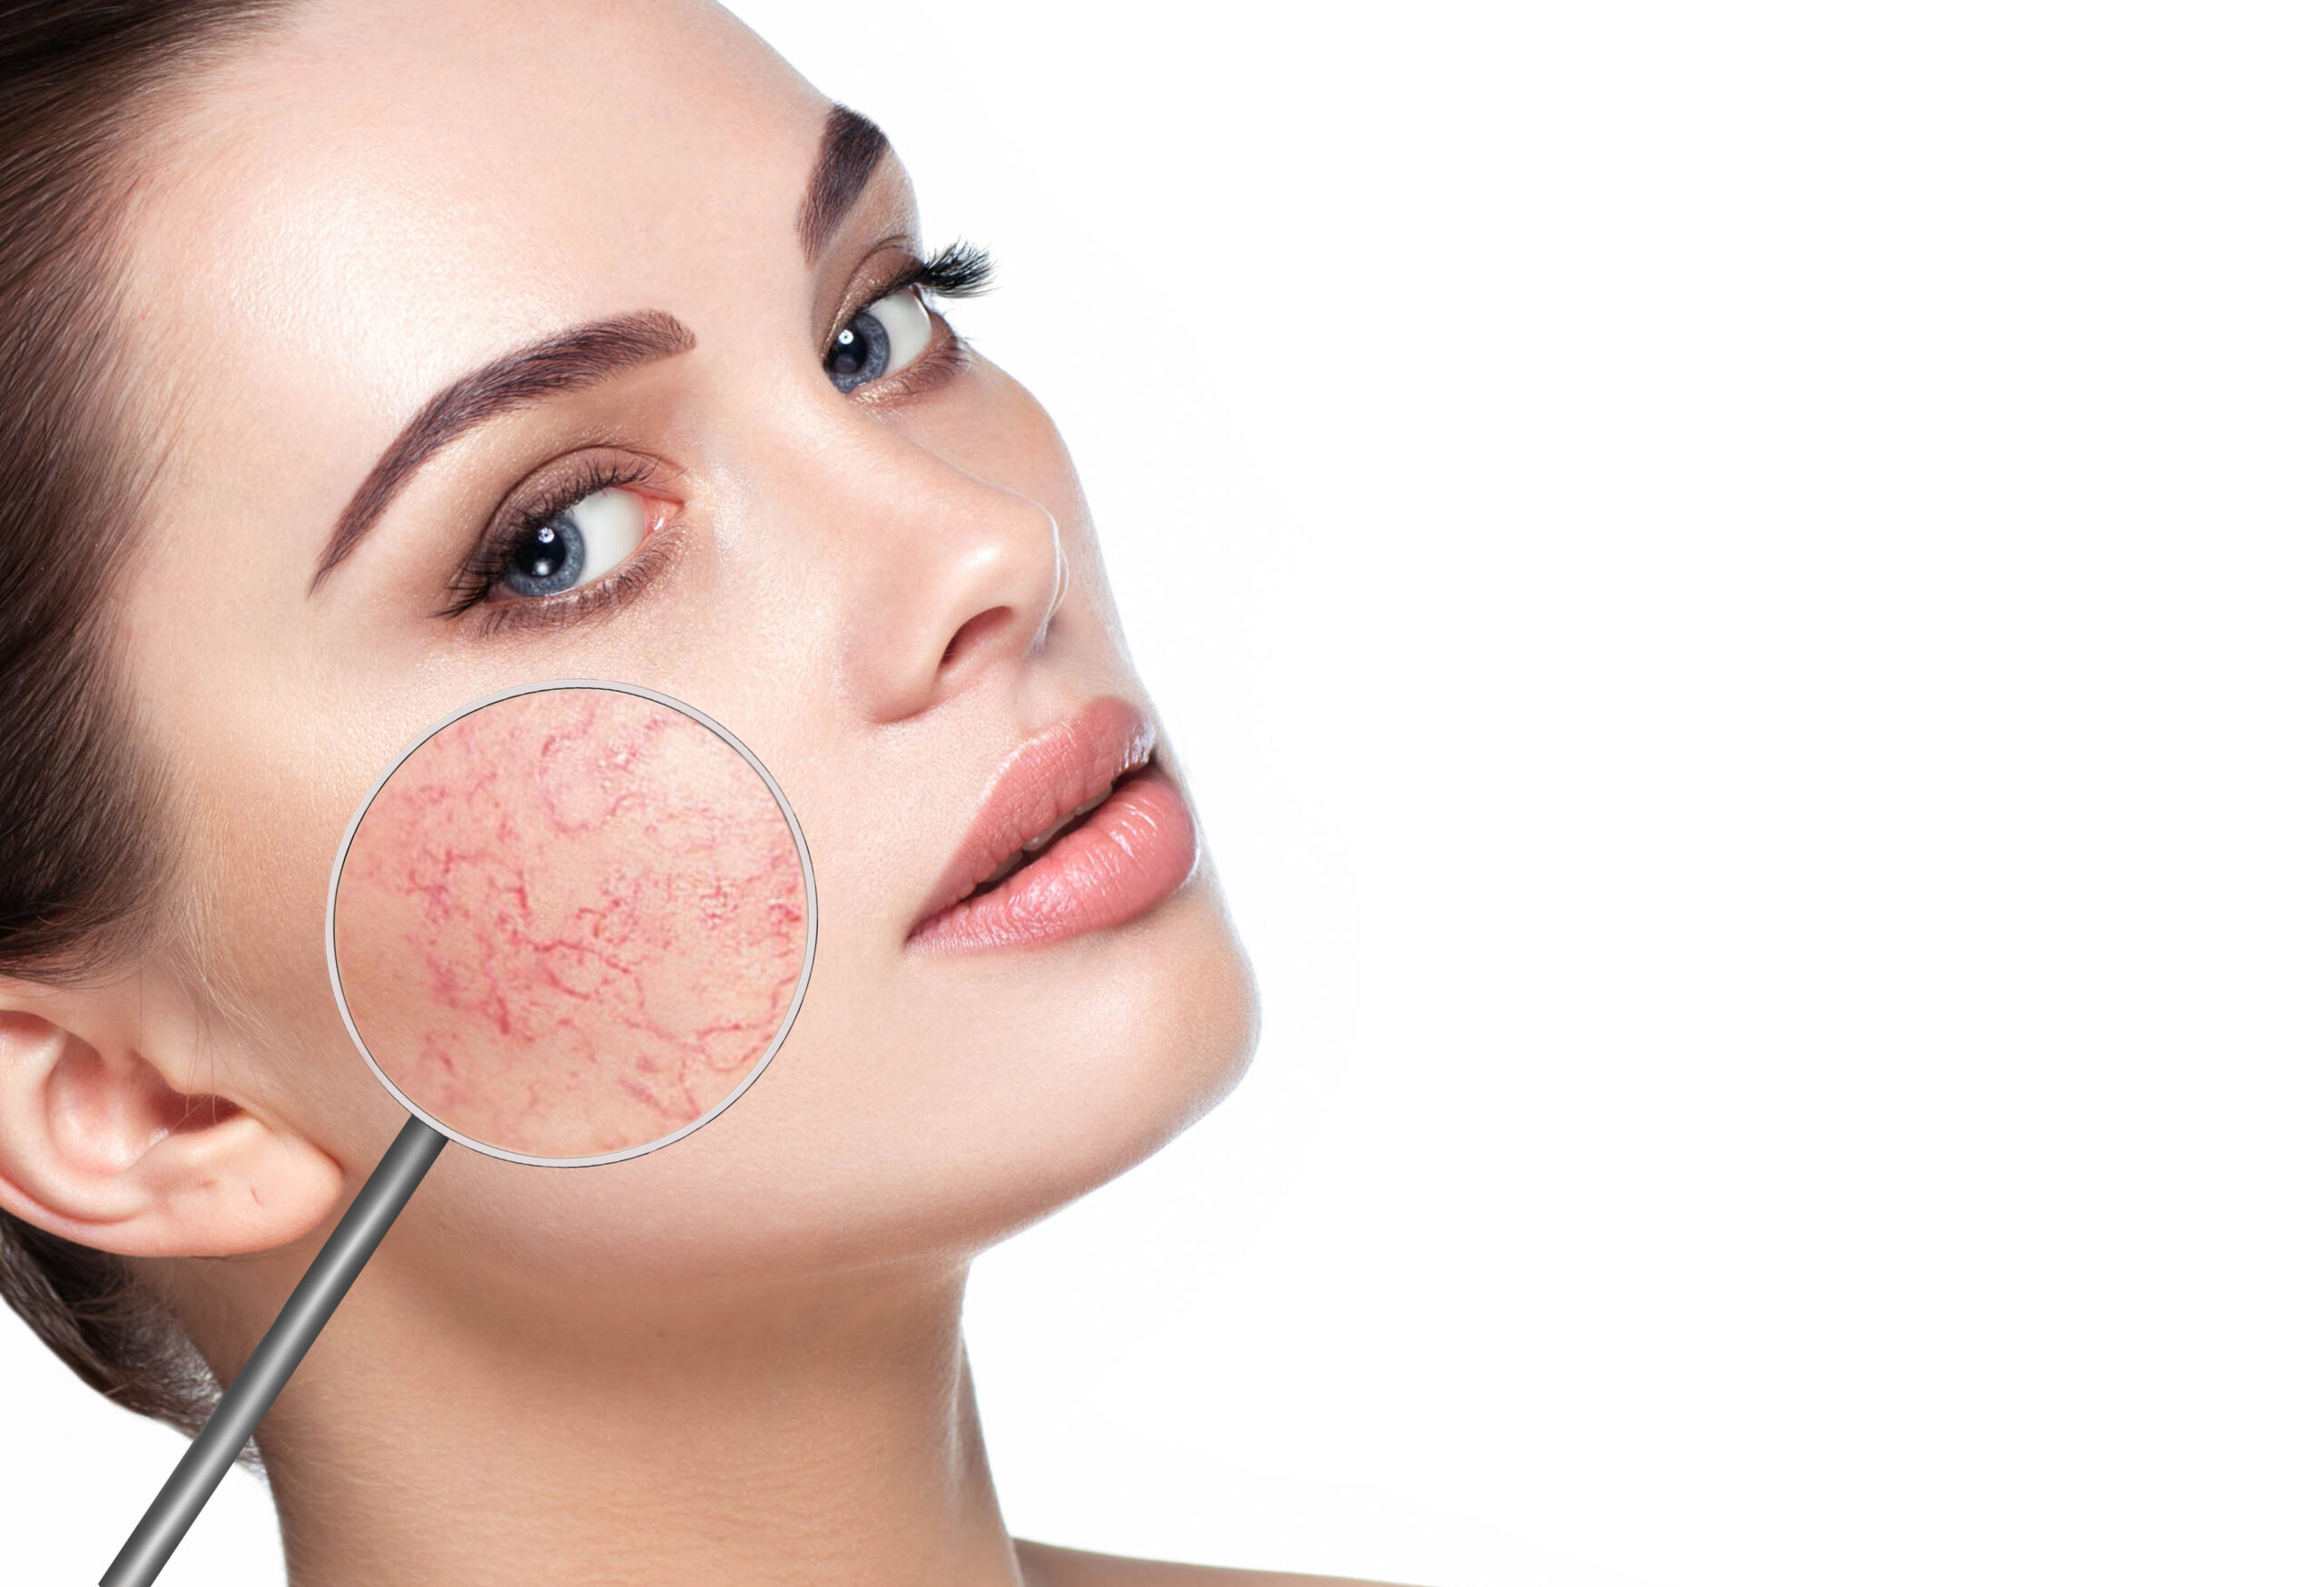 Laser Treatment for Rosacea: What to Know